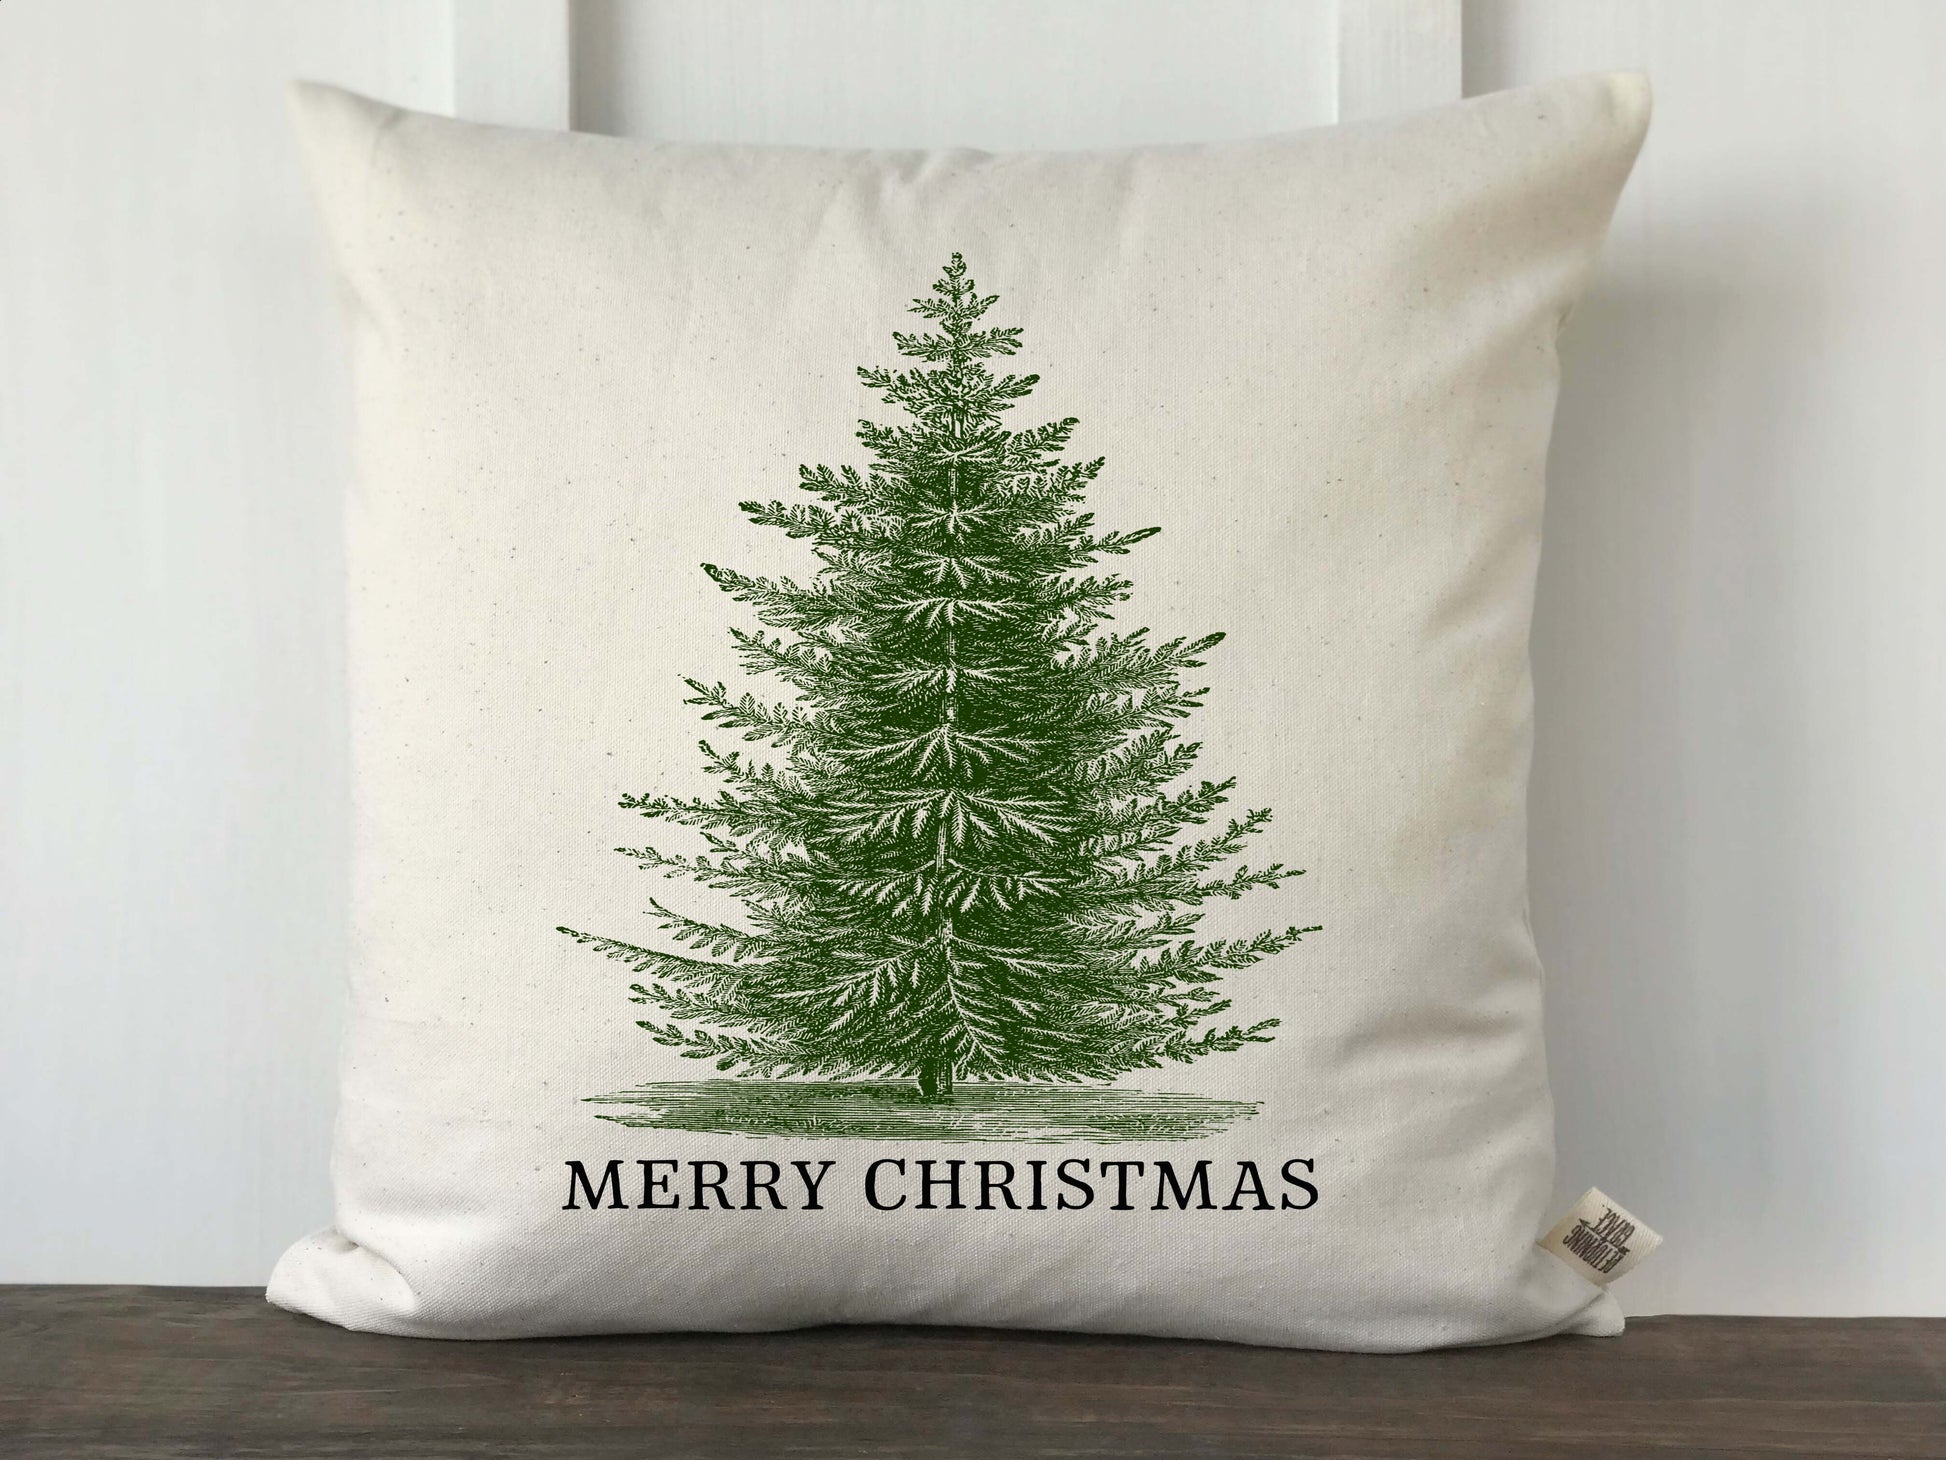 Vintage Christmas Tree Merry Christmas Pillow Cover - Green and Black - Returning Grace Designs